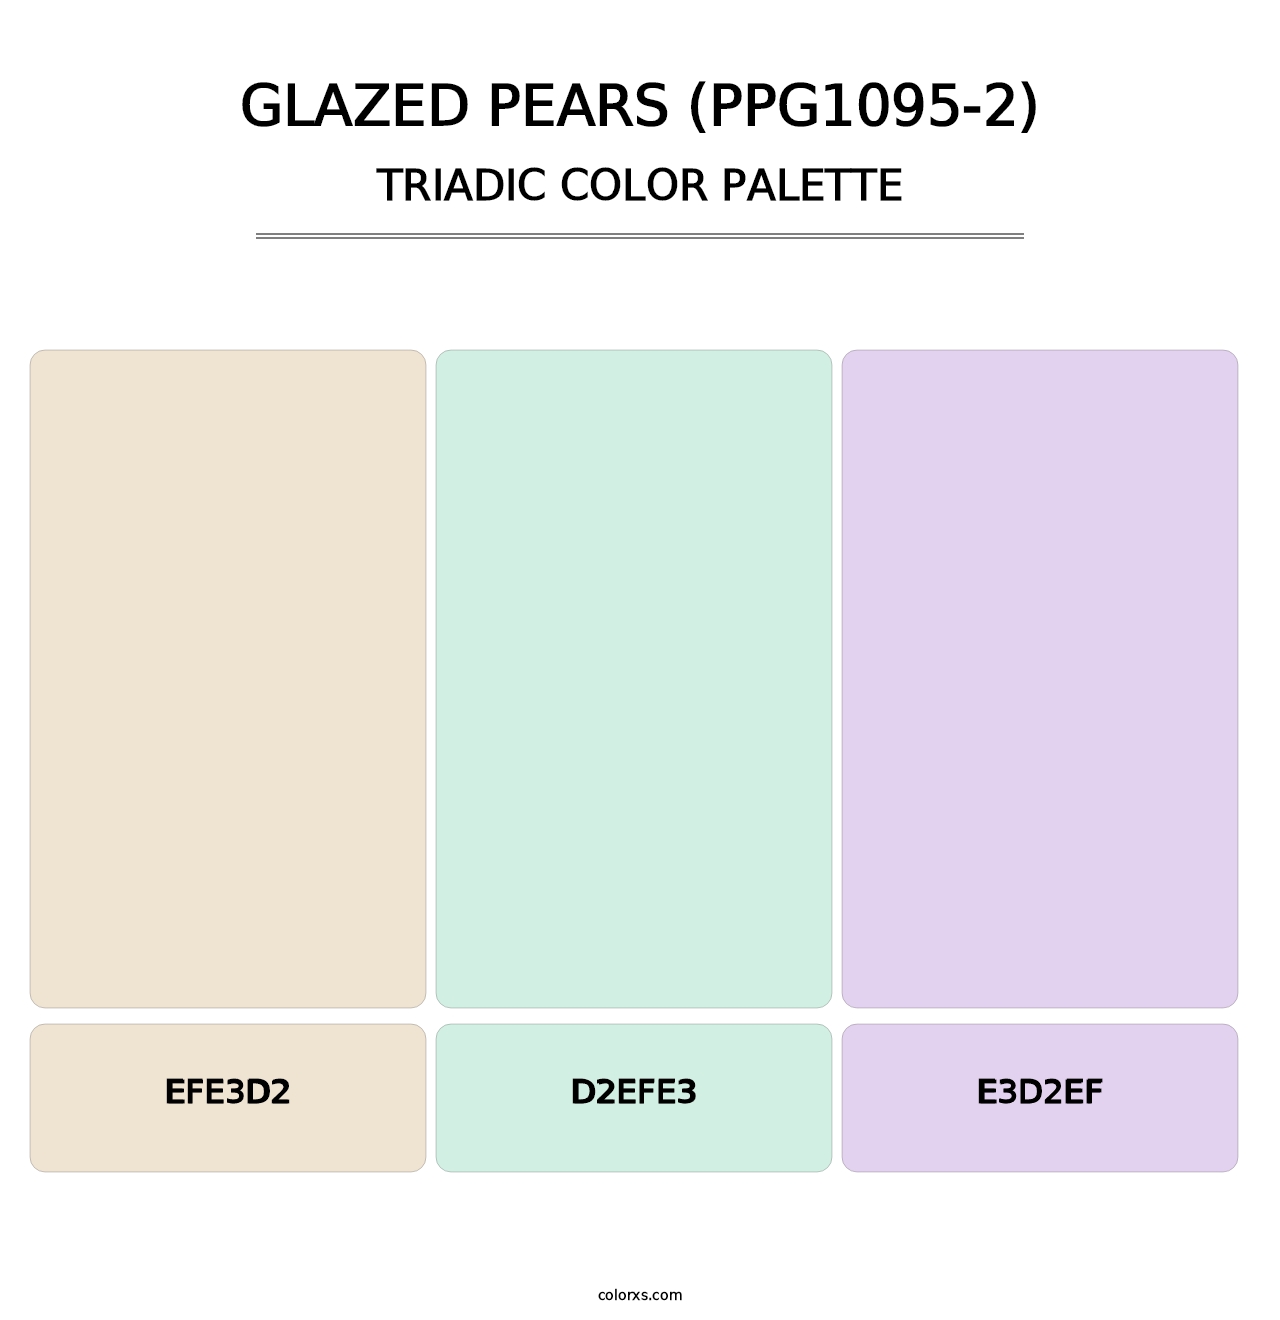 Glazed Pears (PPG1095-2) - Triadic Color Palette